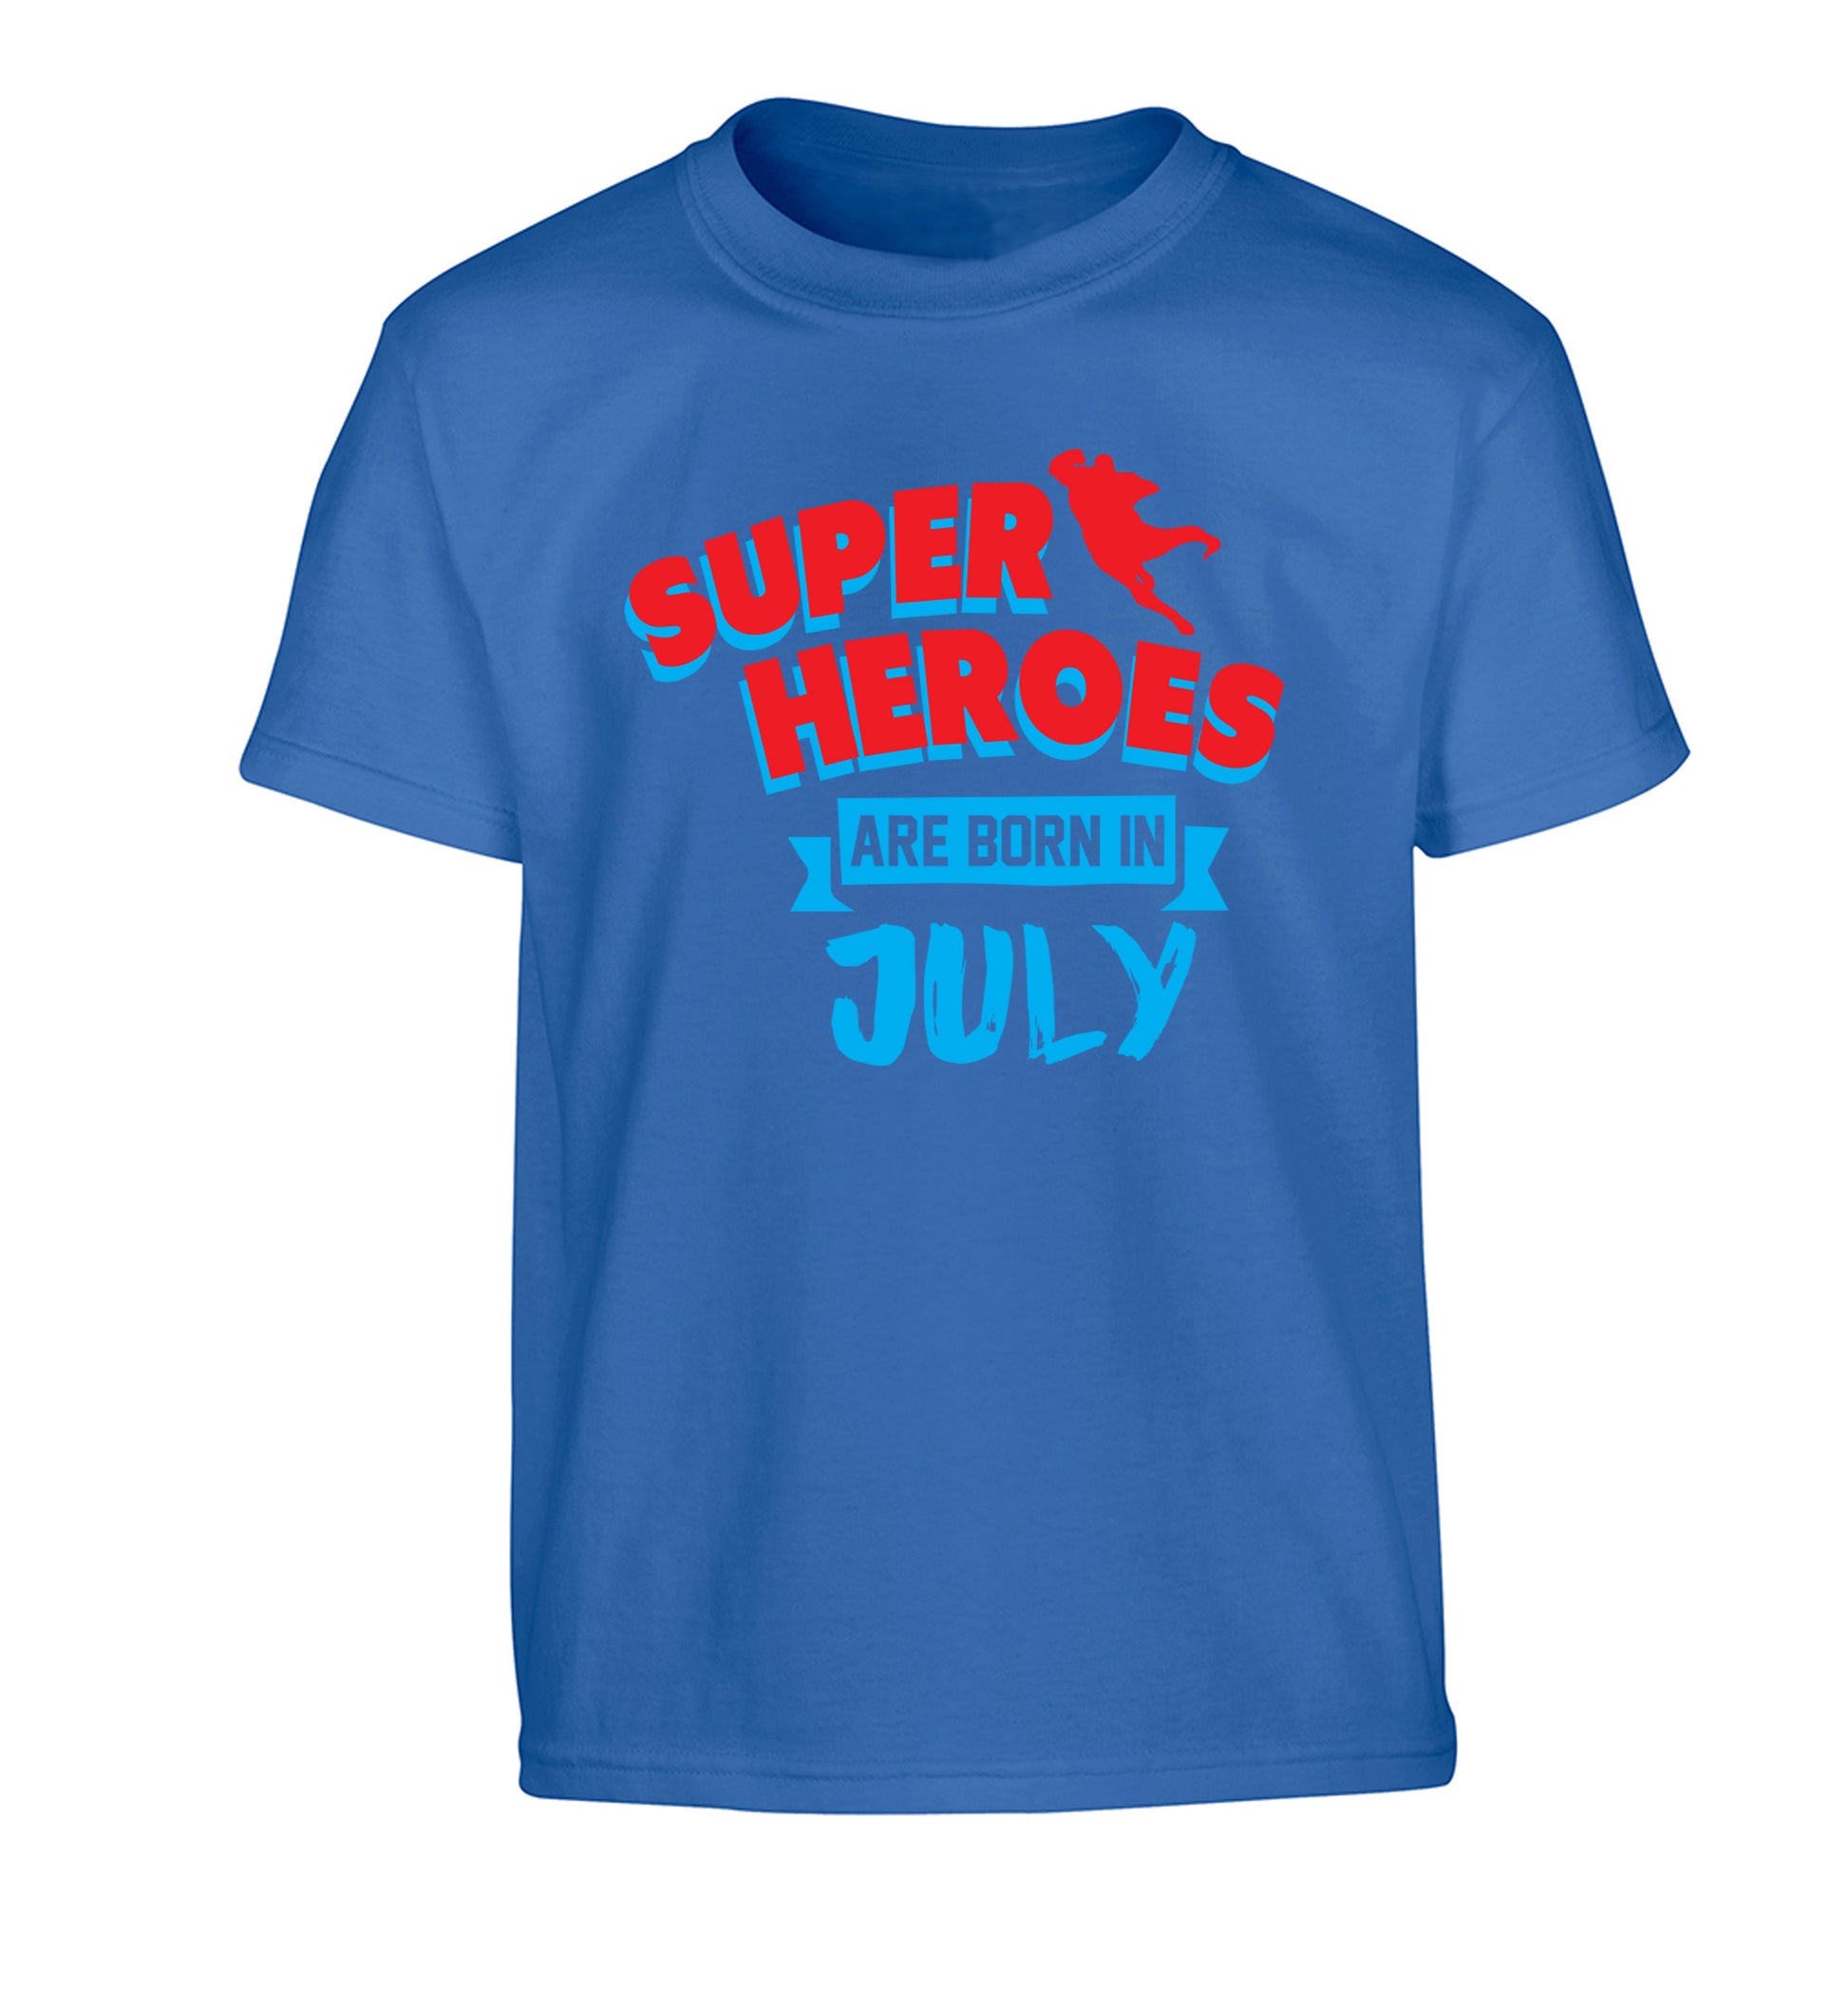 Superheroes are born in July Children's blue Tshirt 12-13 Years